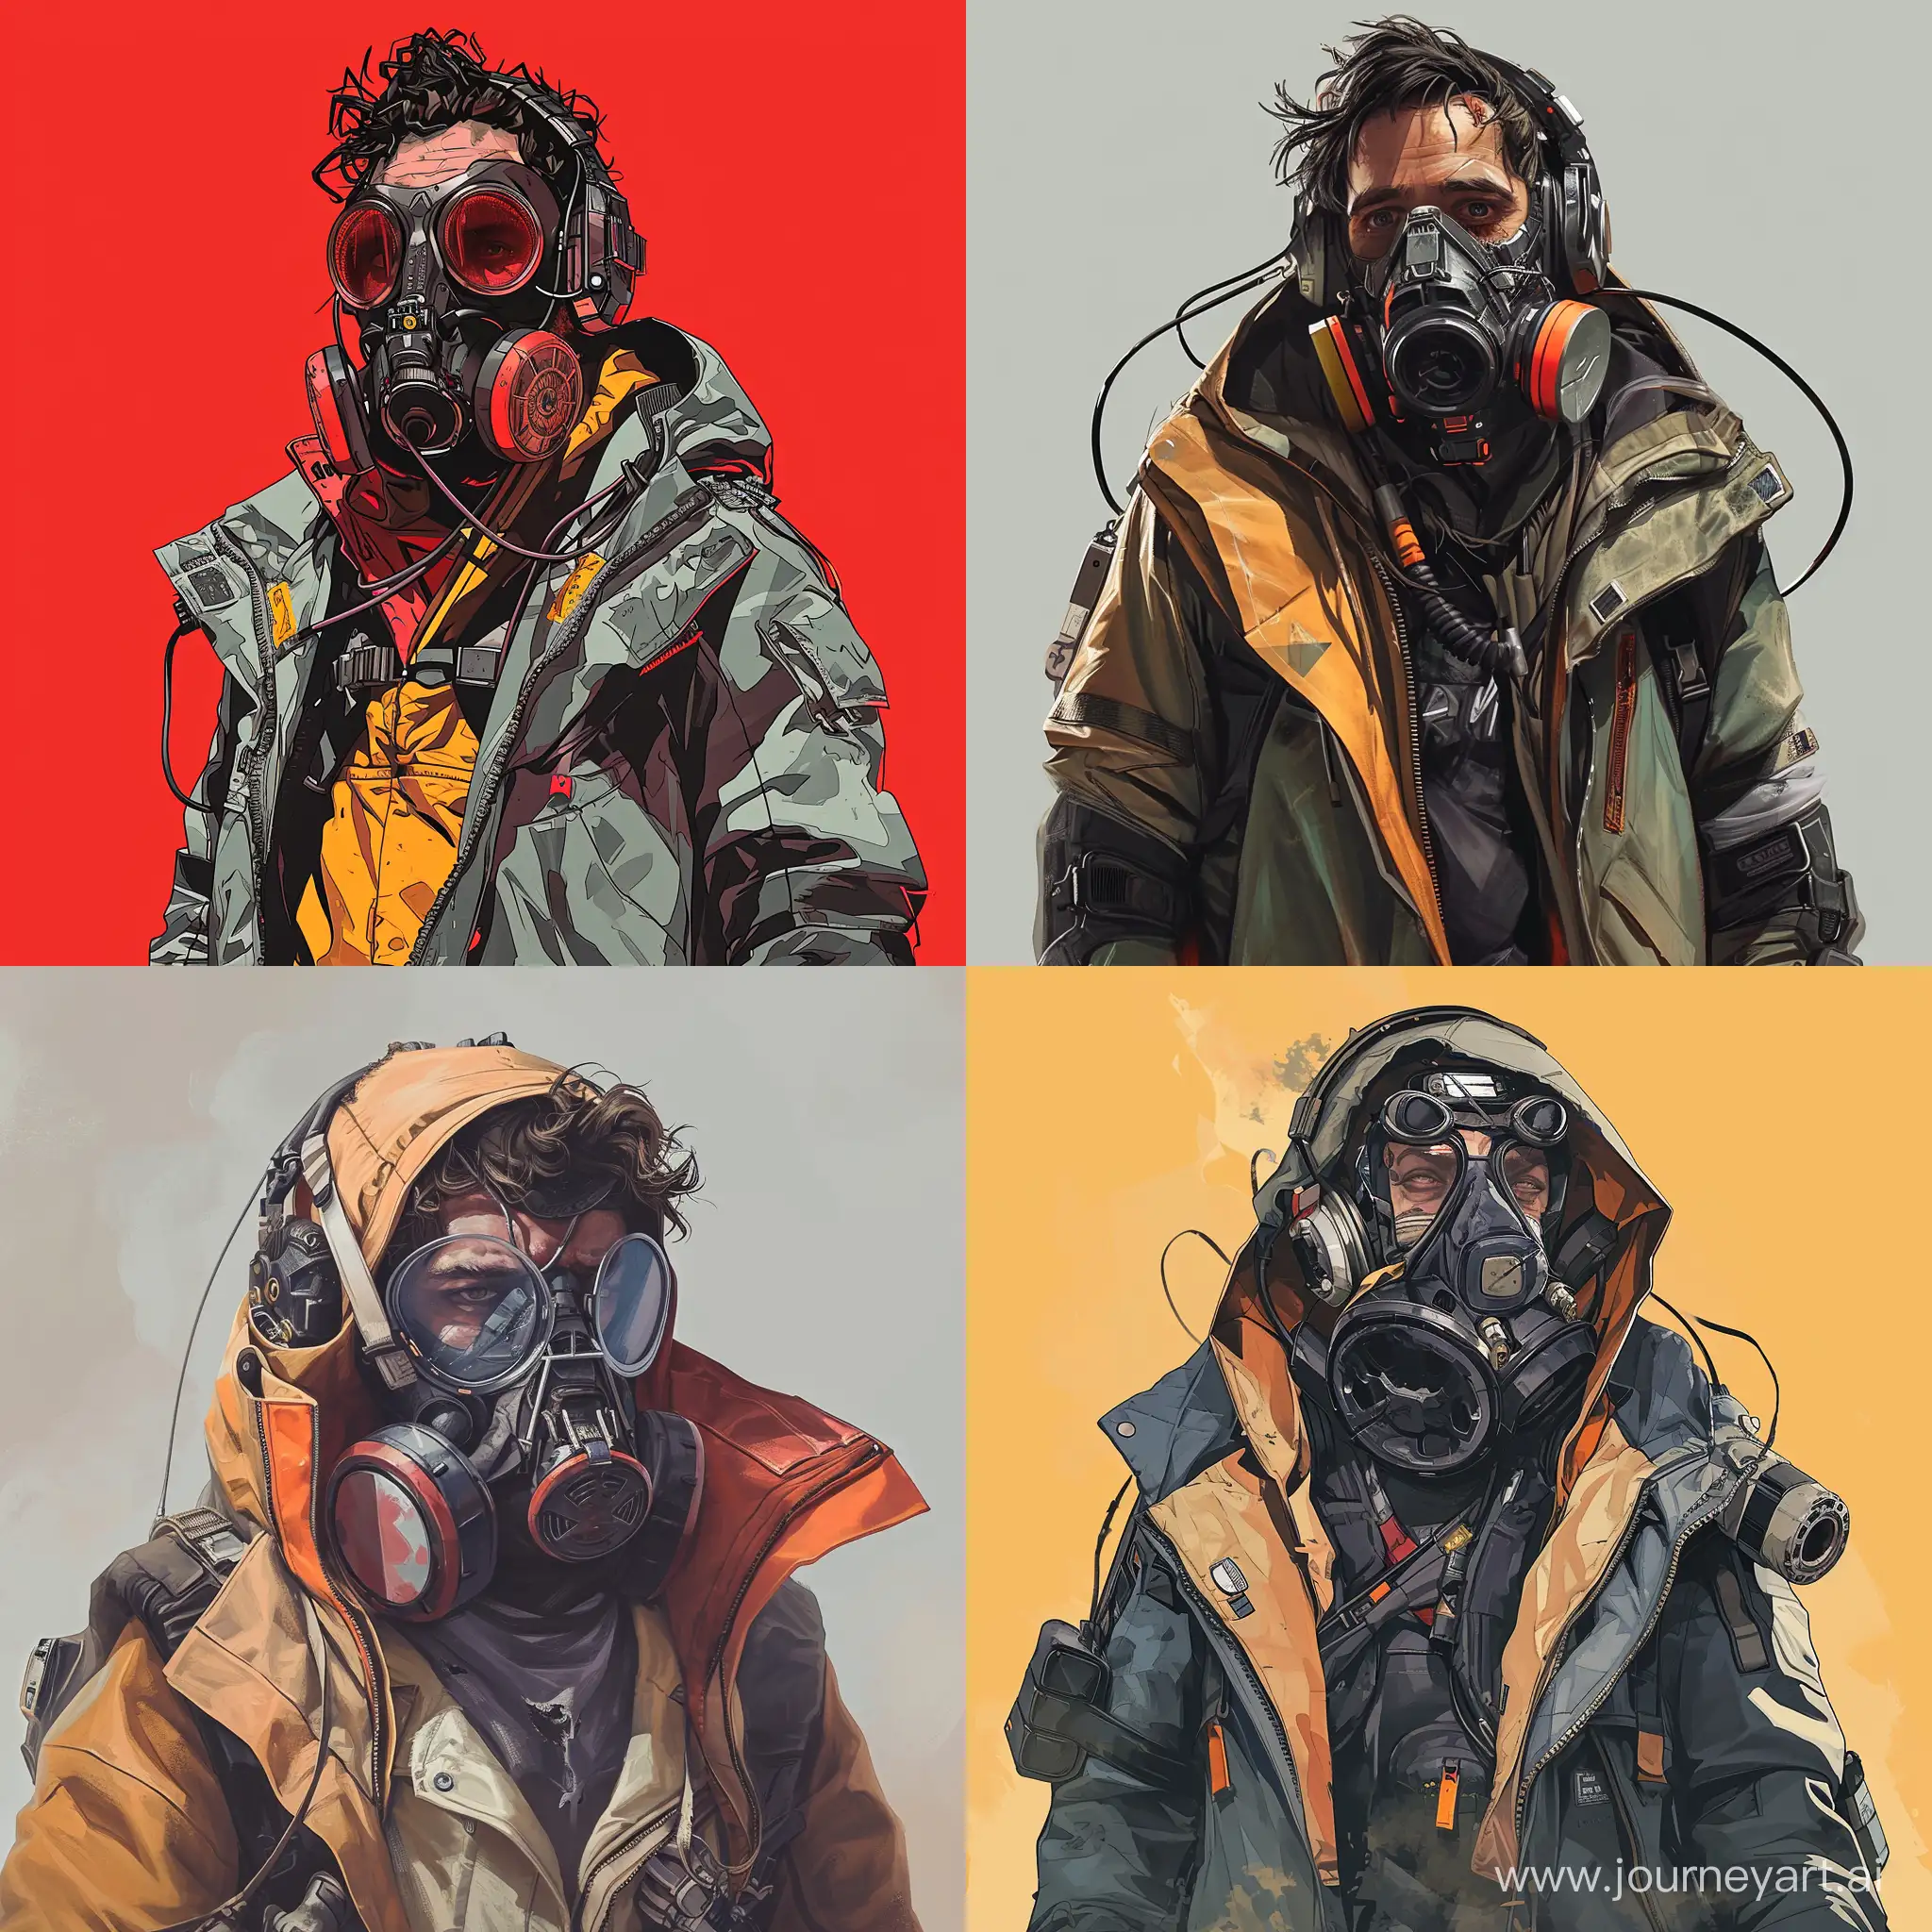 a man wearing a gas mask and jacket, apex legends character, apex legends, disco elysium style, portrait of apex legends, laurie greasley and james jean, disco elysium character, apex legends armor, disco elysium style!!!, disco elysium art, cyberpunk hero, postapocalyptic explorer, disco elysium, disco elysium video game